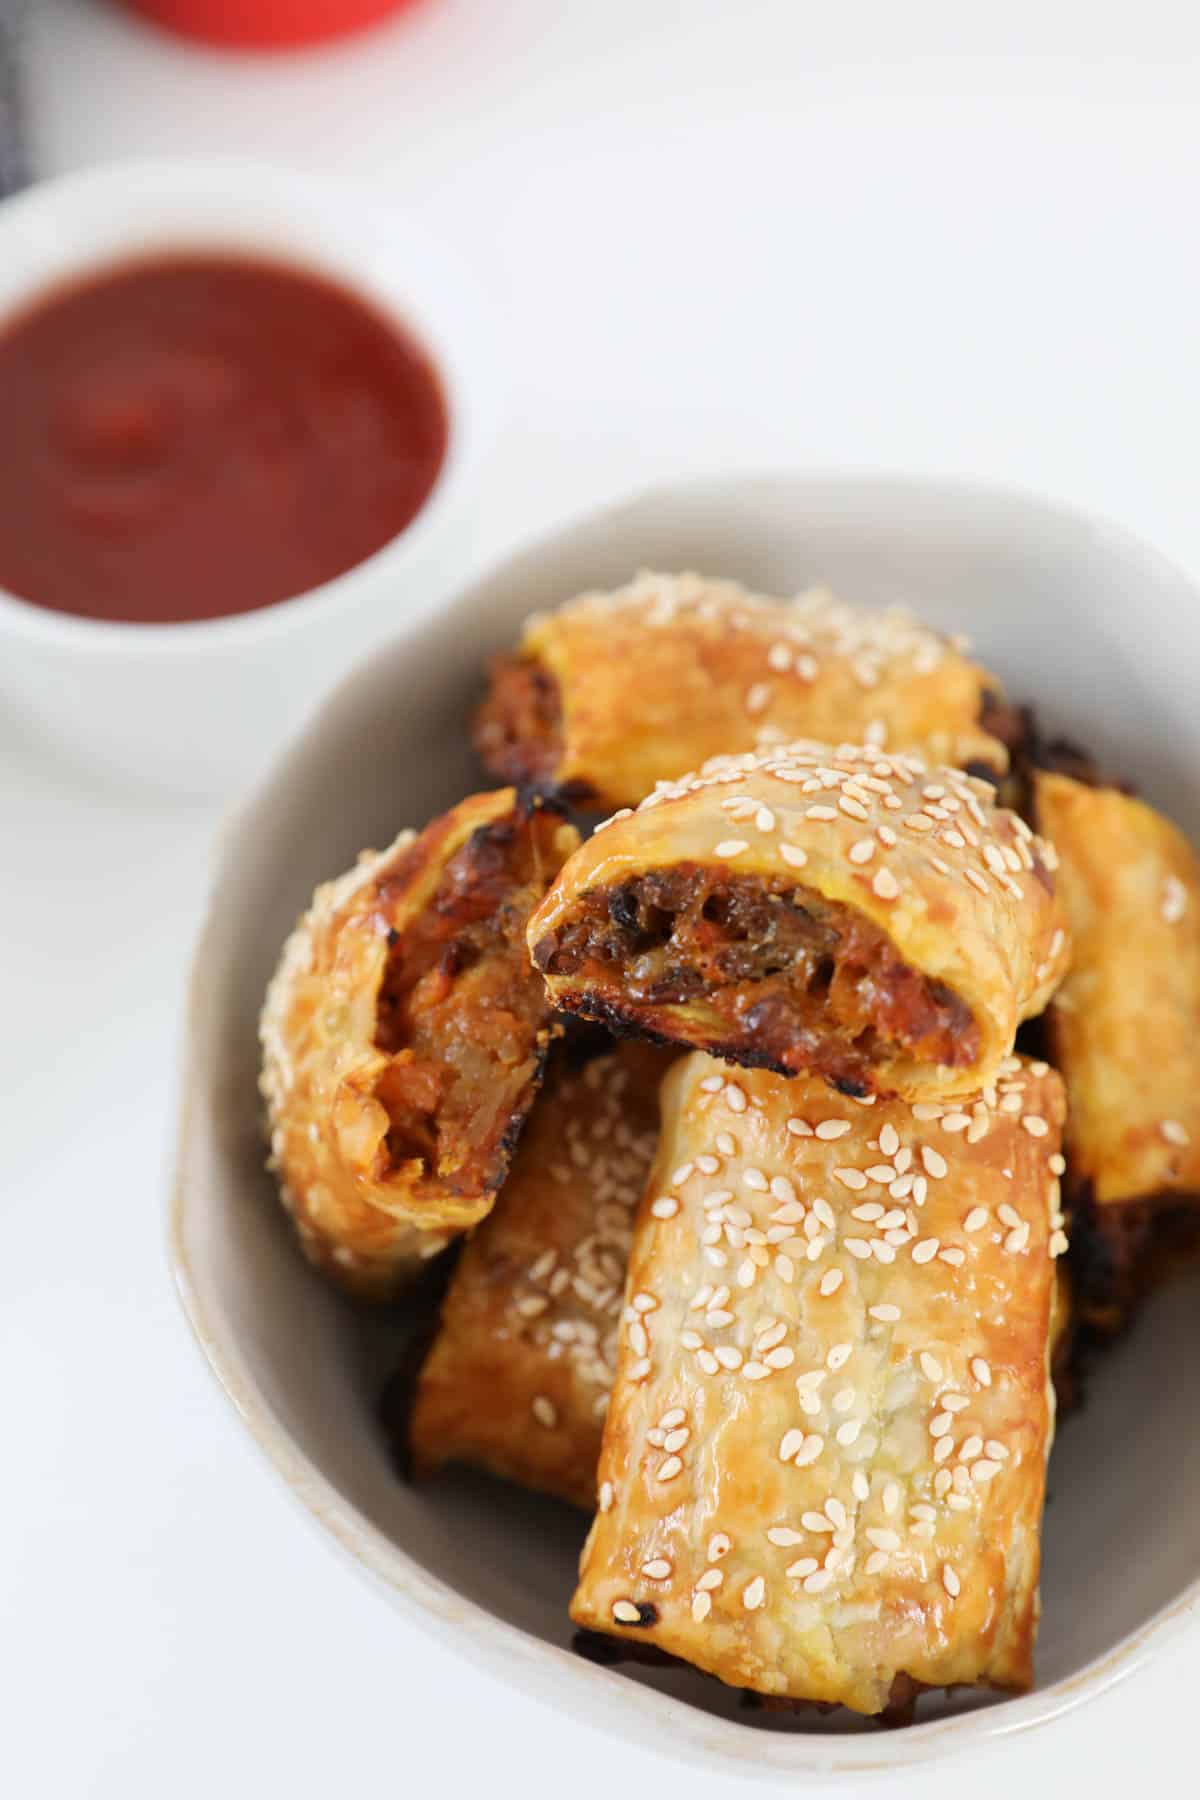 Lentil sausage rolls in a white bowl with a small bowl of sauce in the background.